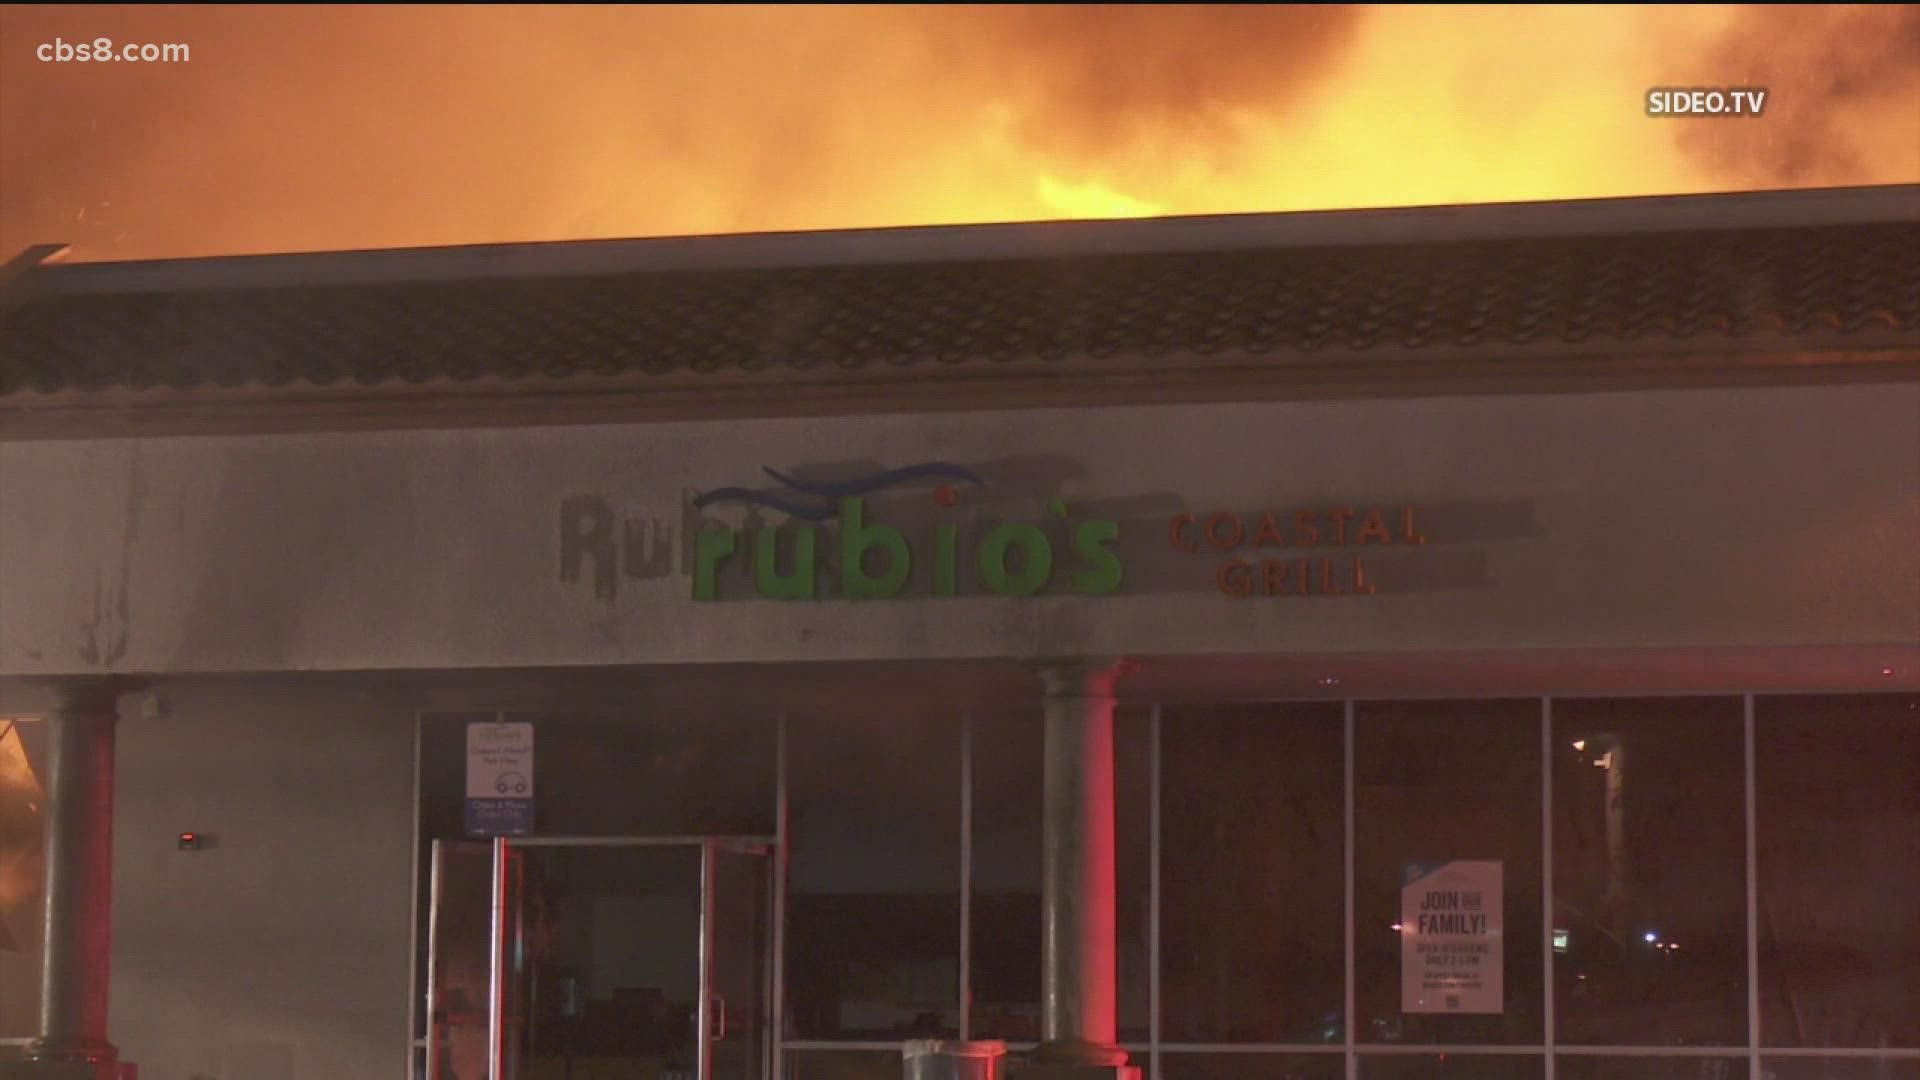 Crews working to extinguish a second alarm fire that broke out overnight at a Rubio's restaurant in Oceanside near College Blvd. and Oceanside Blvd.